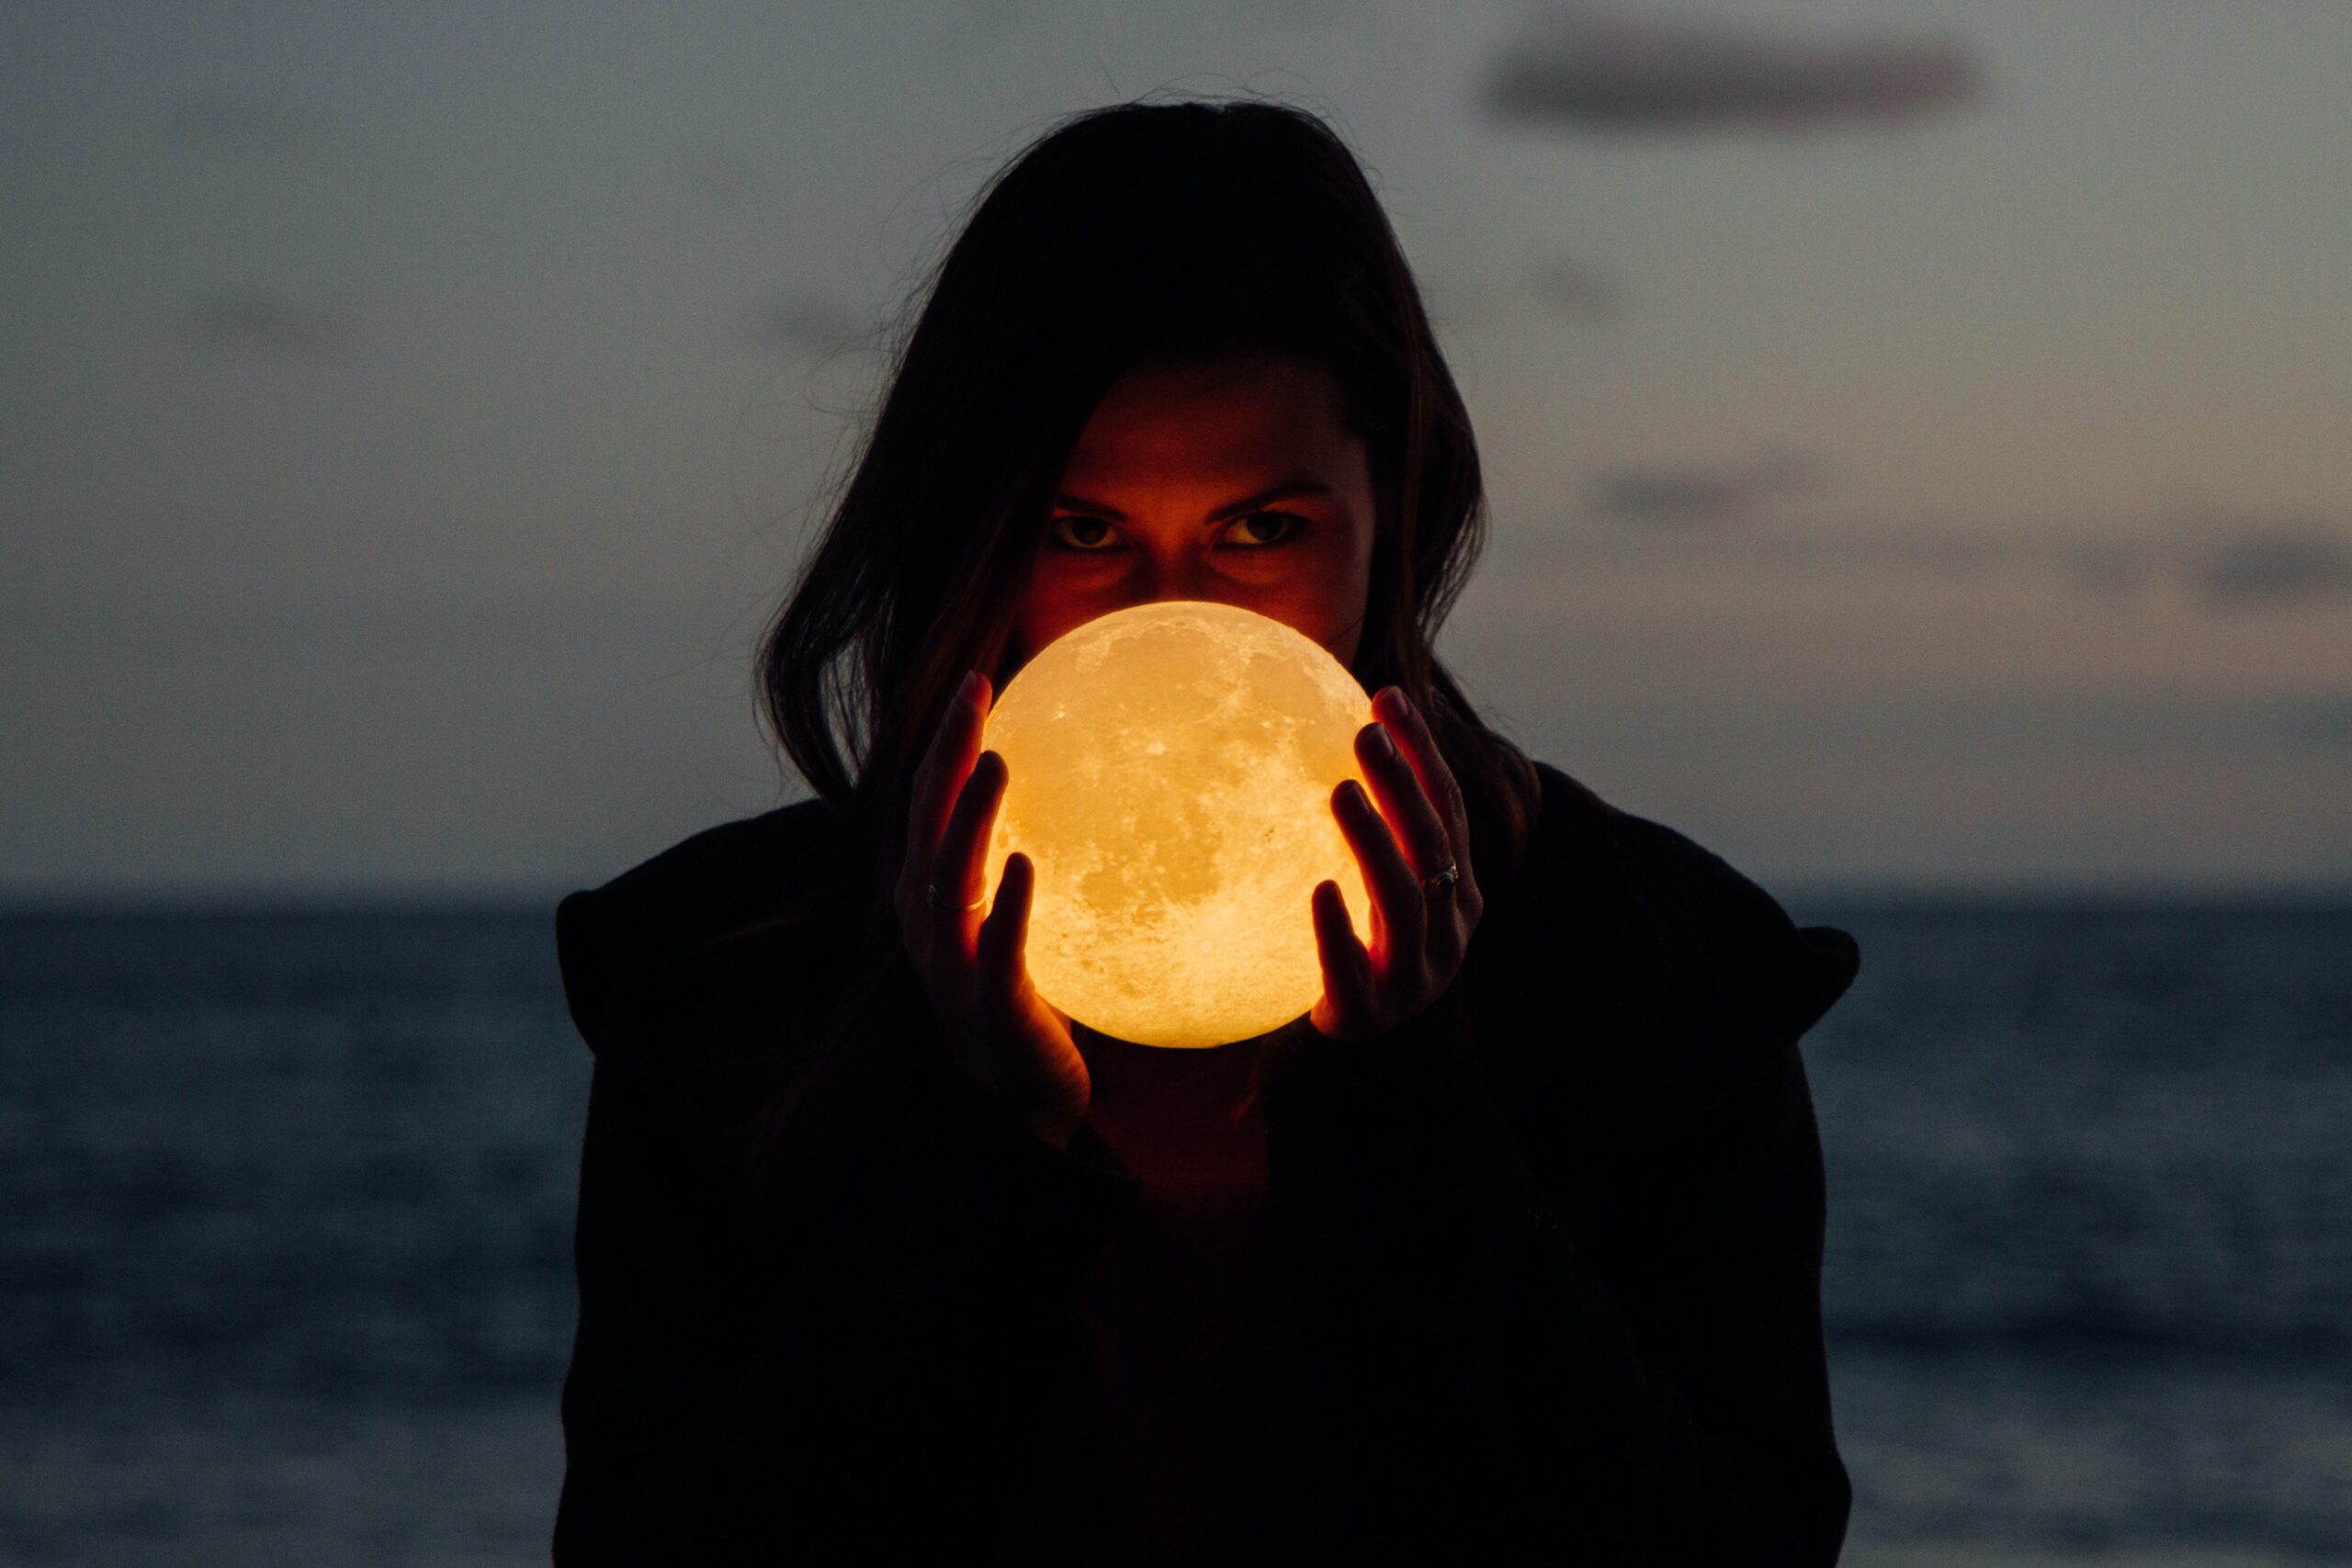 Image of a person holding a glowing full moon 